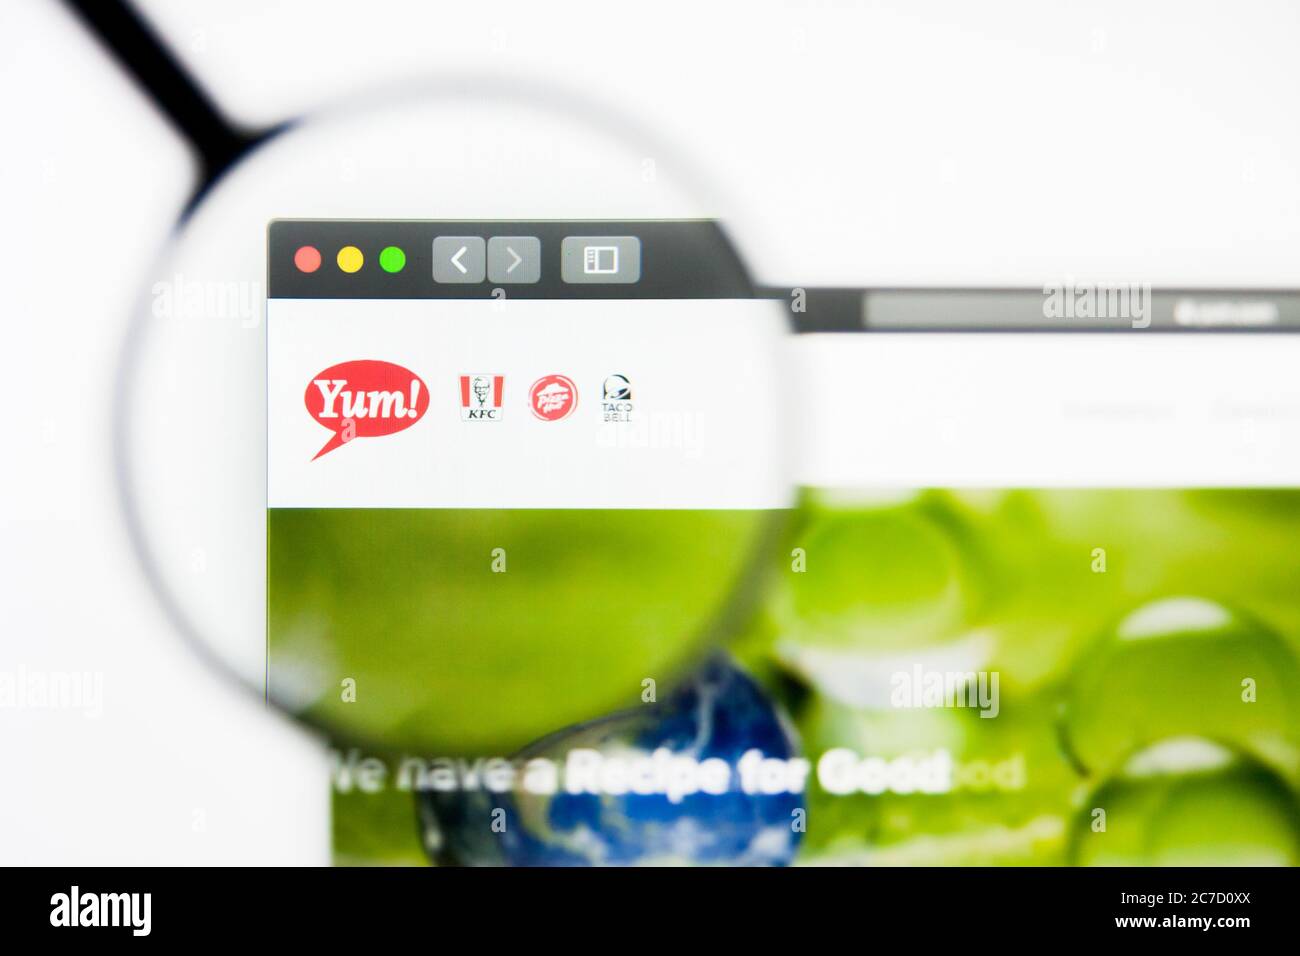 Los Angeles, California, USA - 8 April 2019: Illustrative Editorial of Yum Brands website homepage. Yum Brands logo visible on display screen. Stock Photo